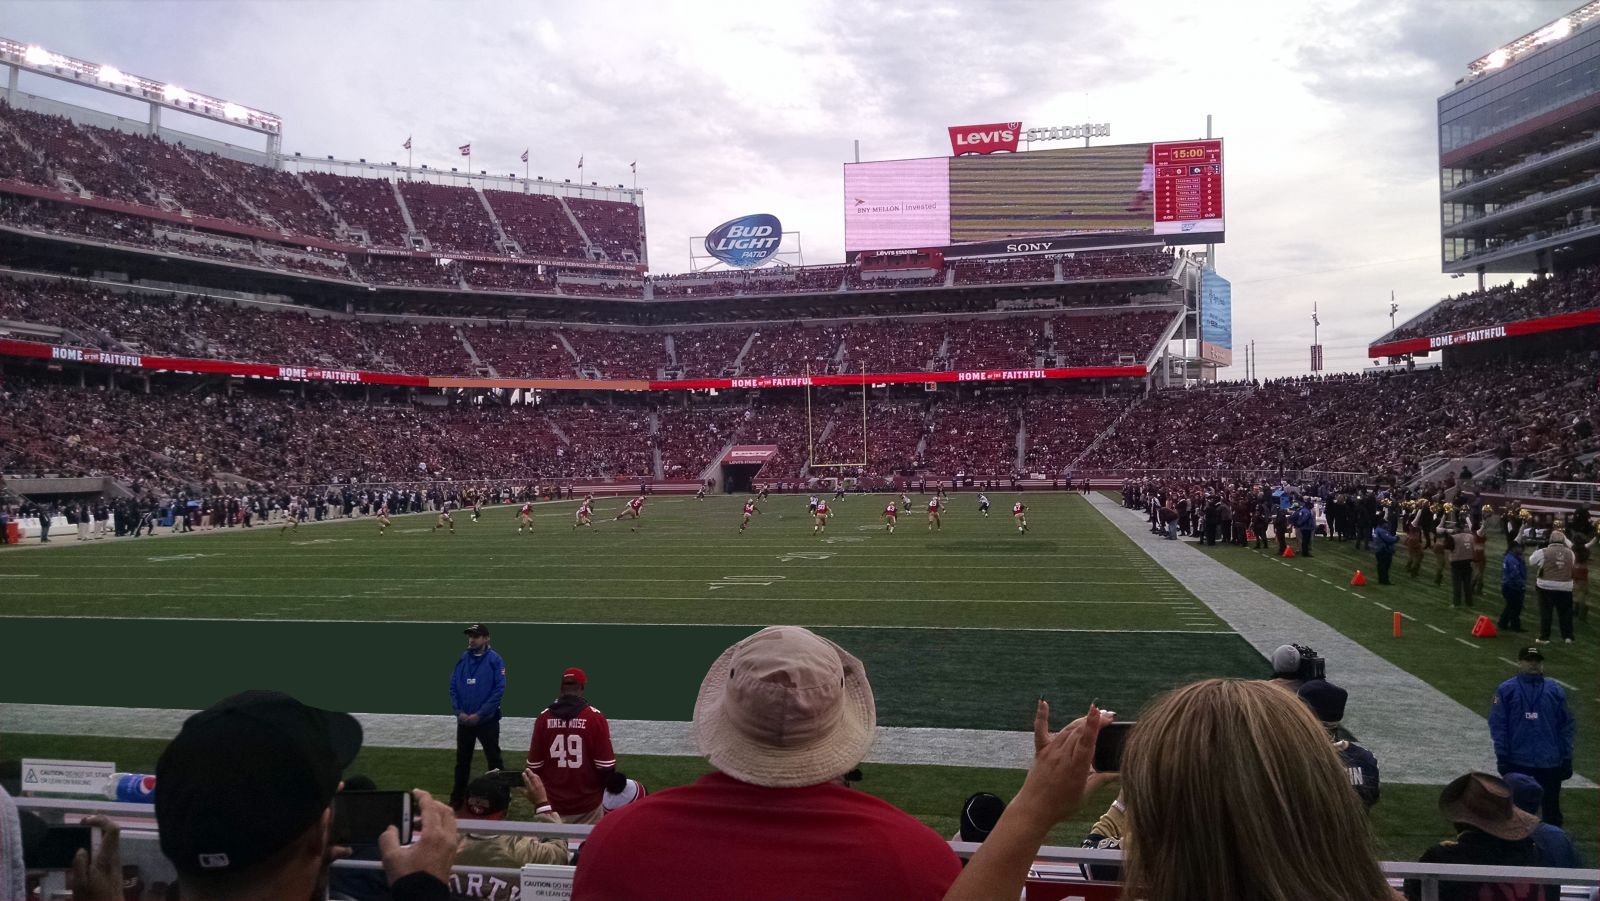 section 101, row 3 seat view  - levi